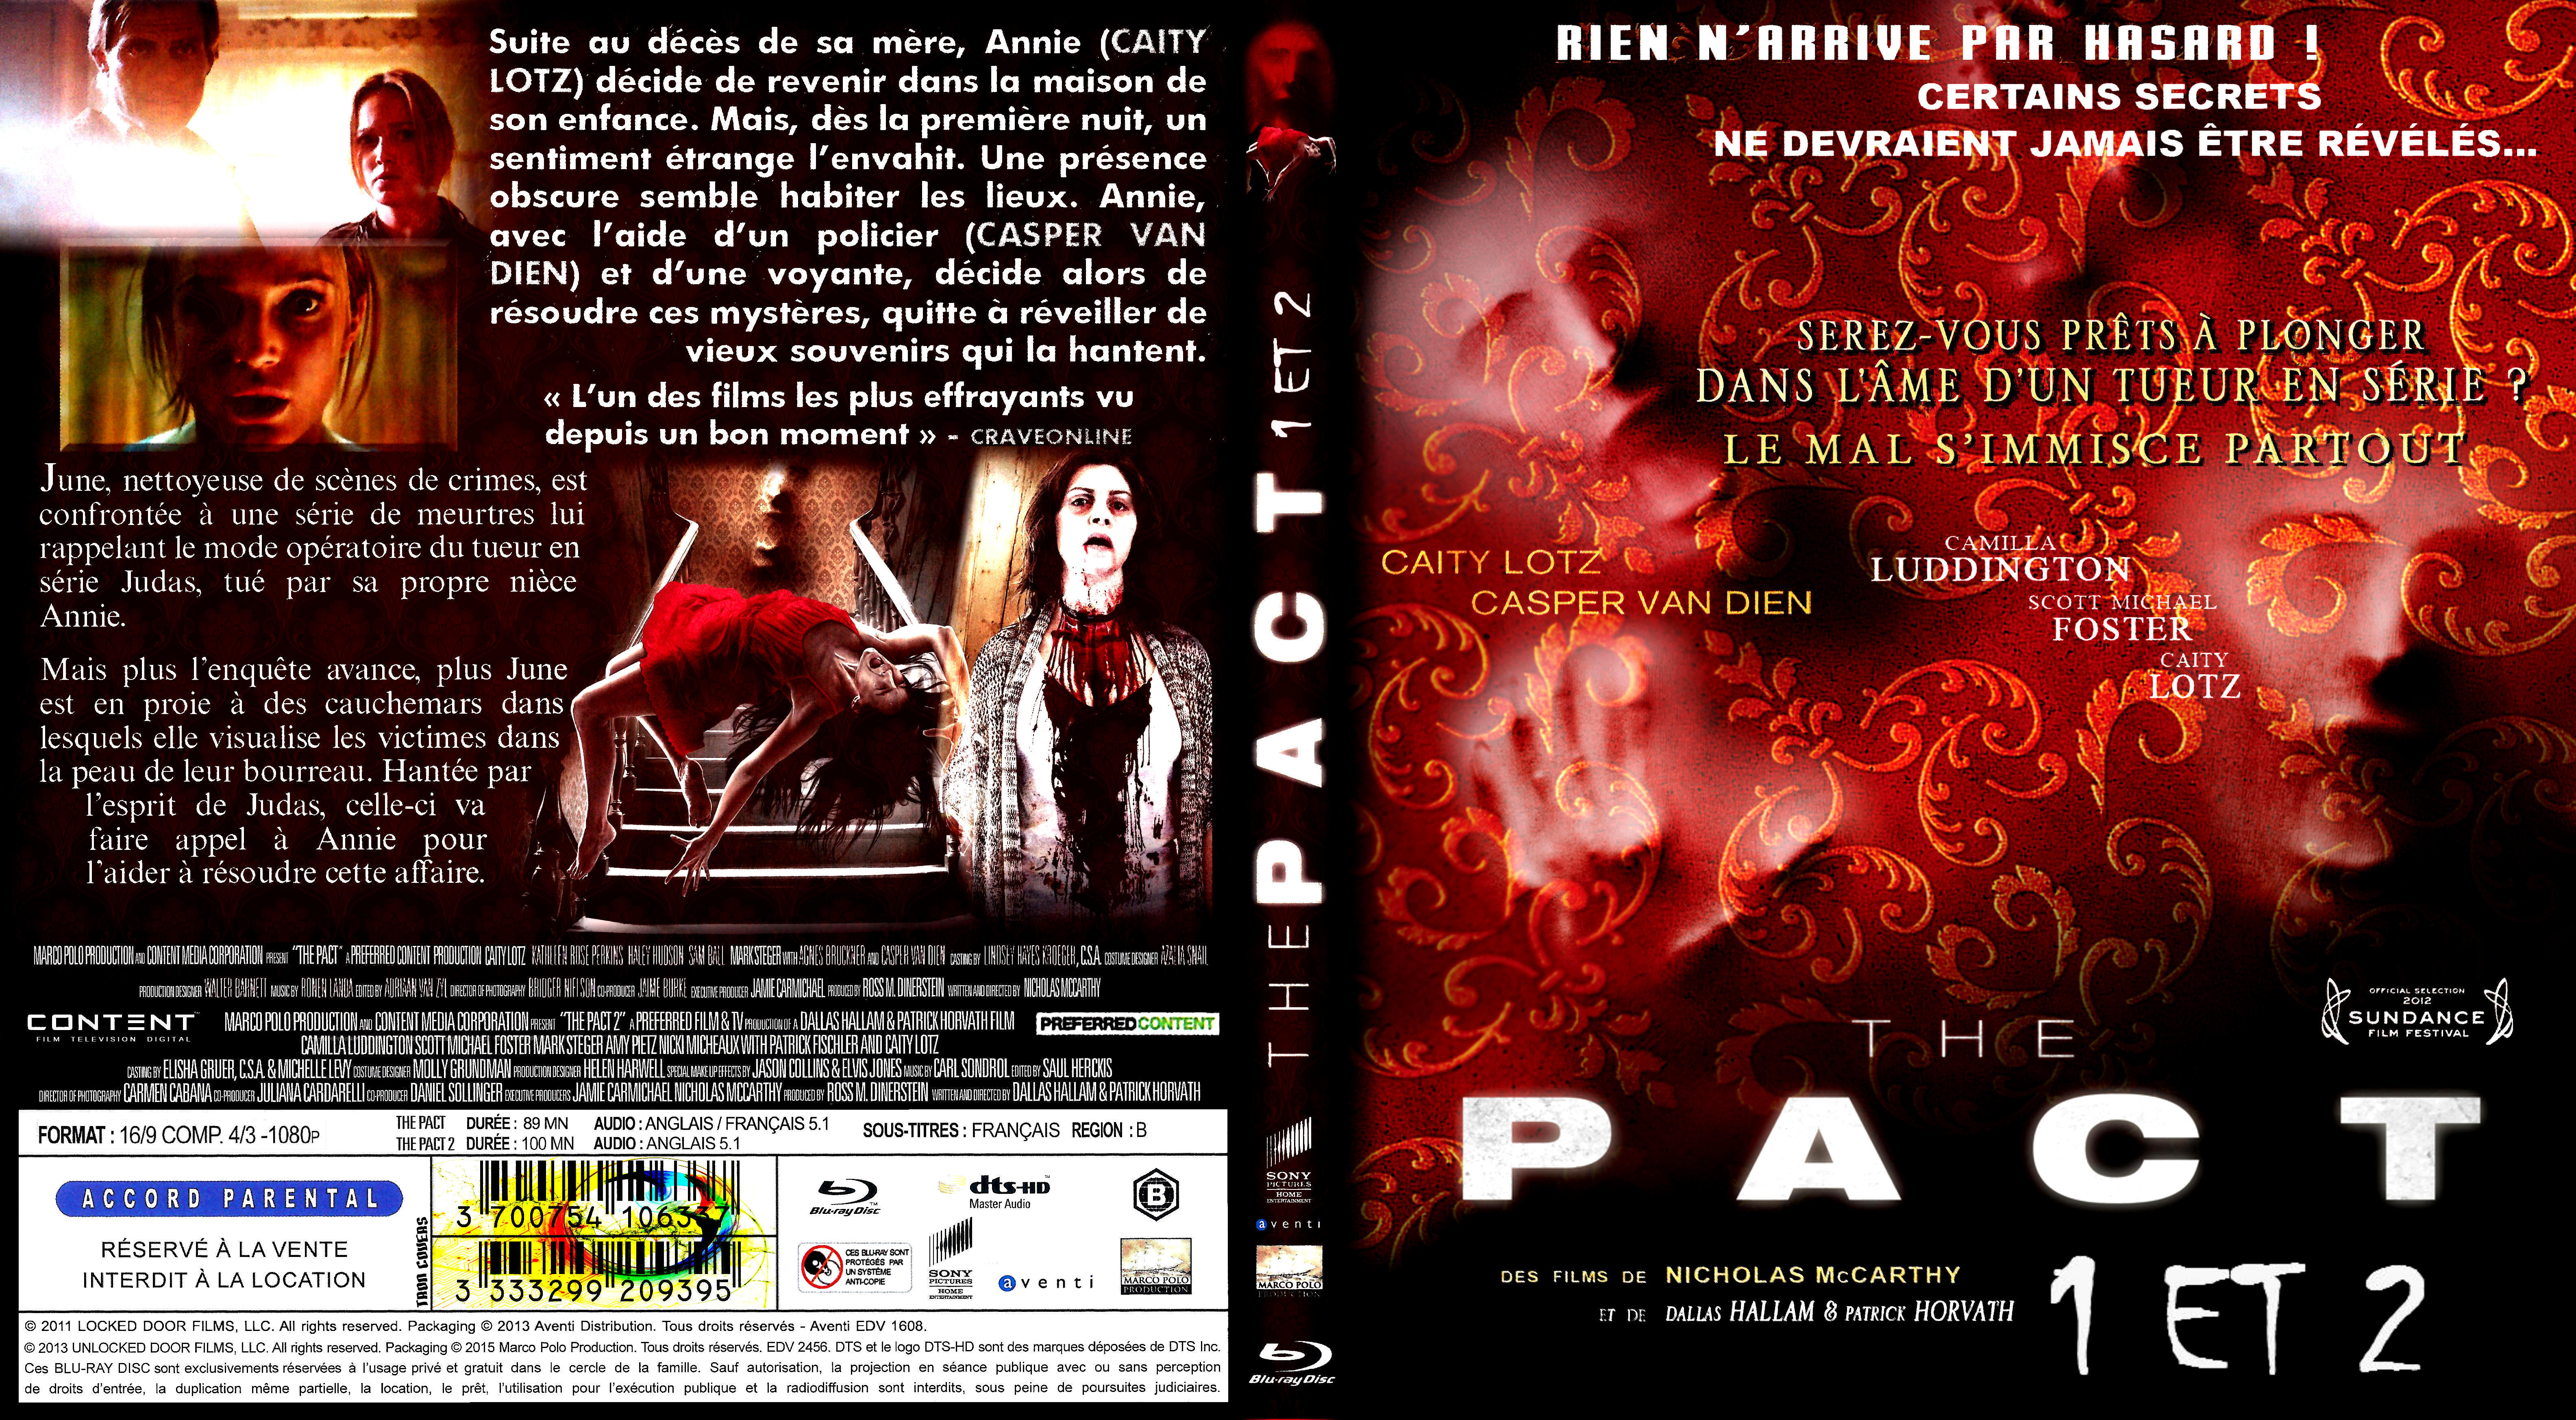 Jaquette DVD The pact 1&2 coffret custom (BLU-RAY)